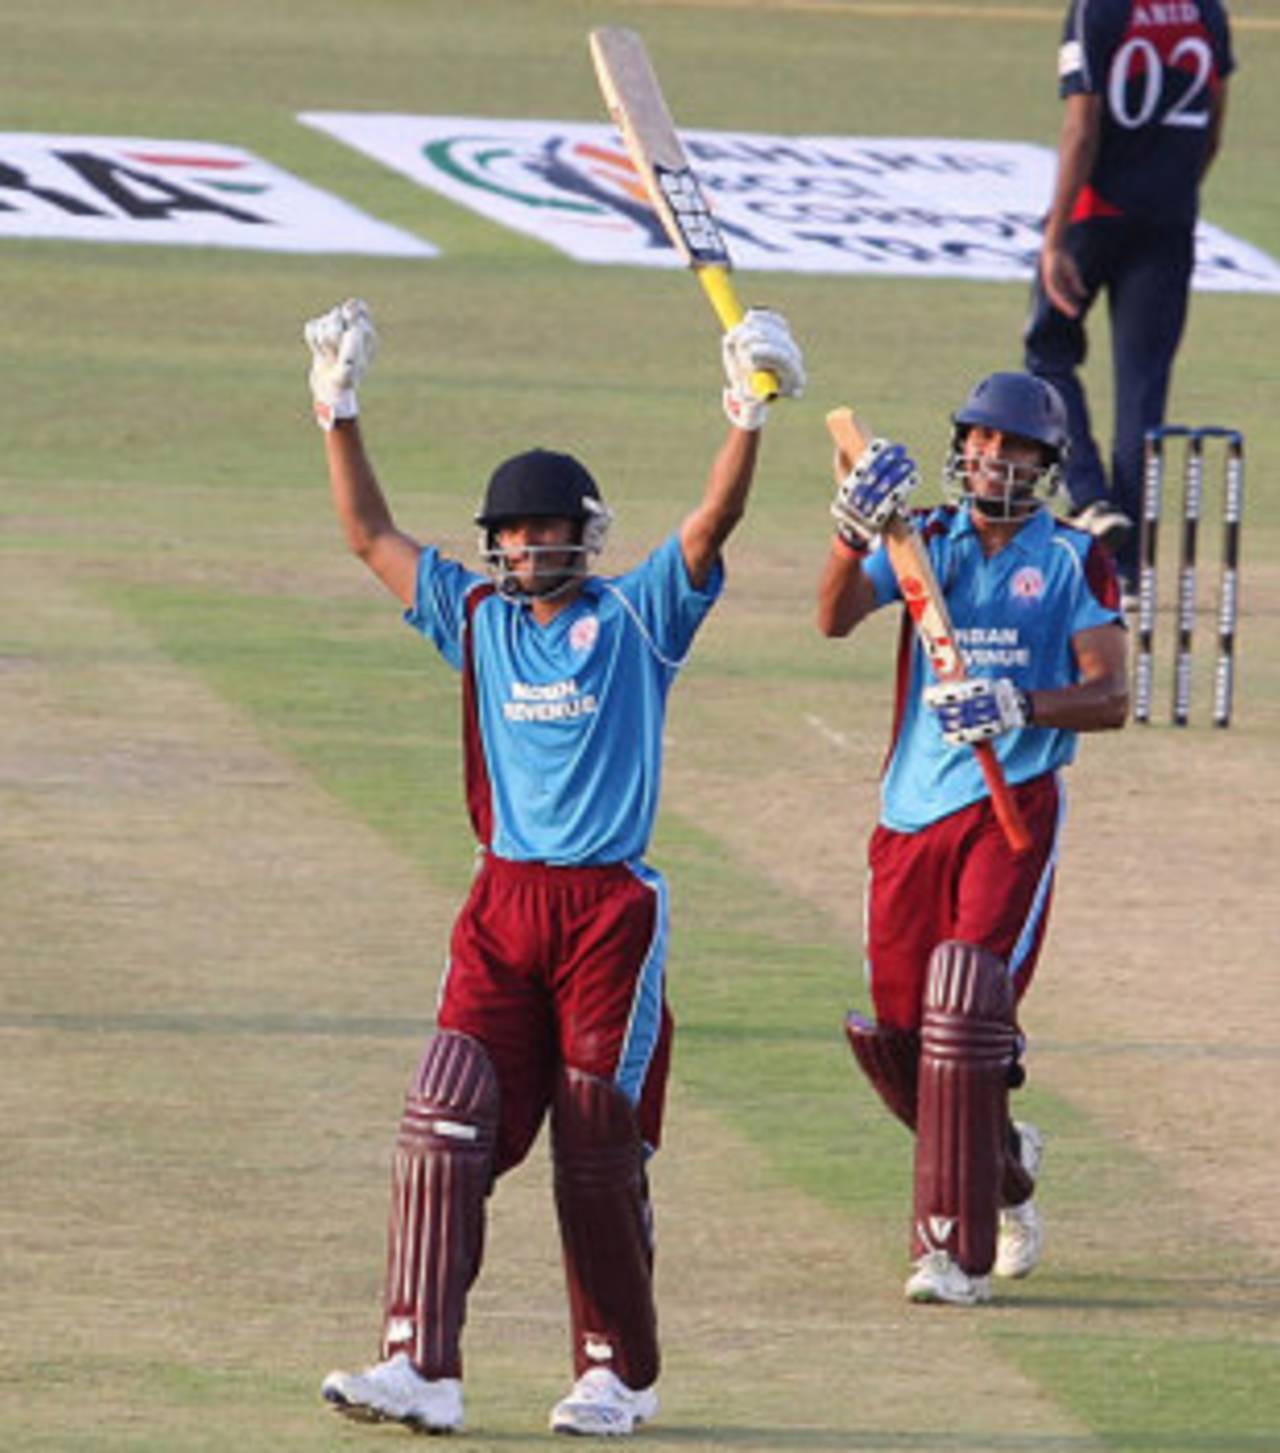 Avik Chaudhary raises the bat after reaching his century, Indian Revenue v Indian Tobacco Company, BCCI Corporate Trophy, Mohali, September 2, 2009